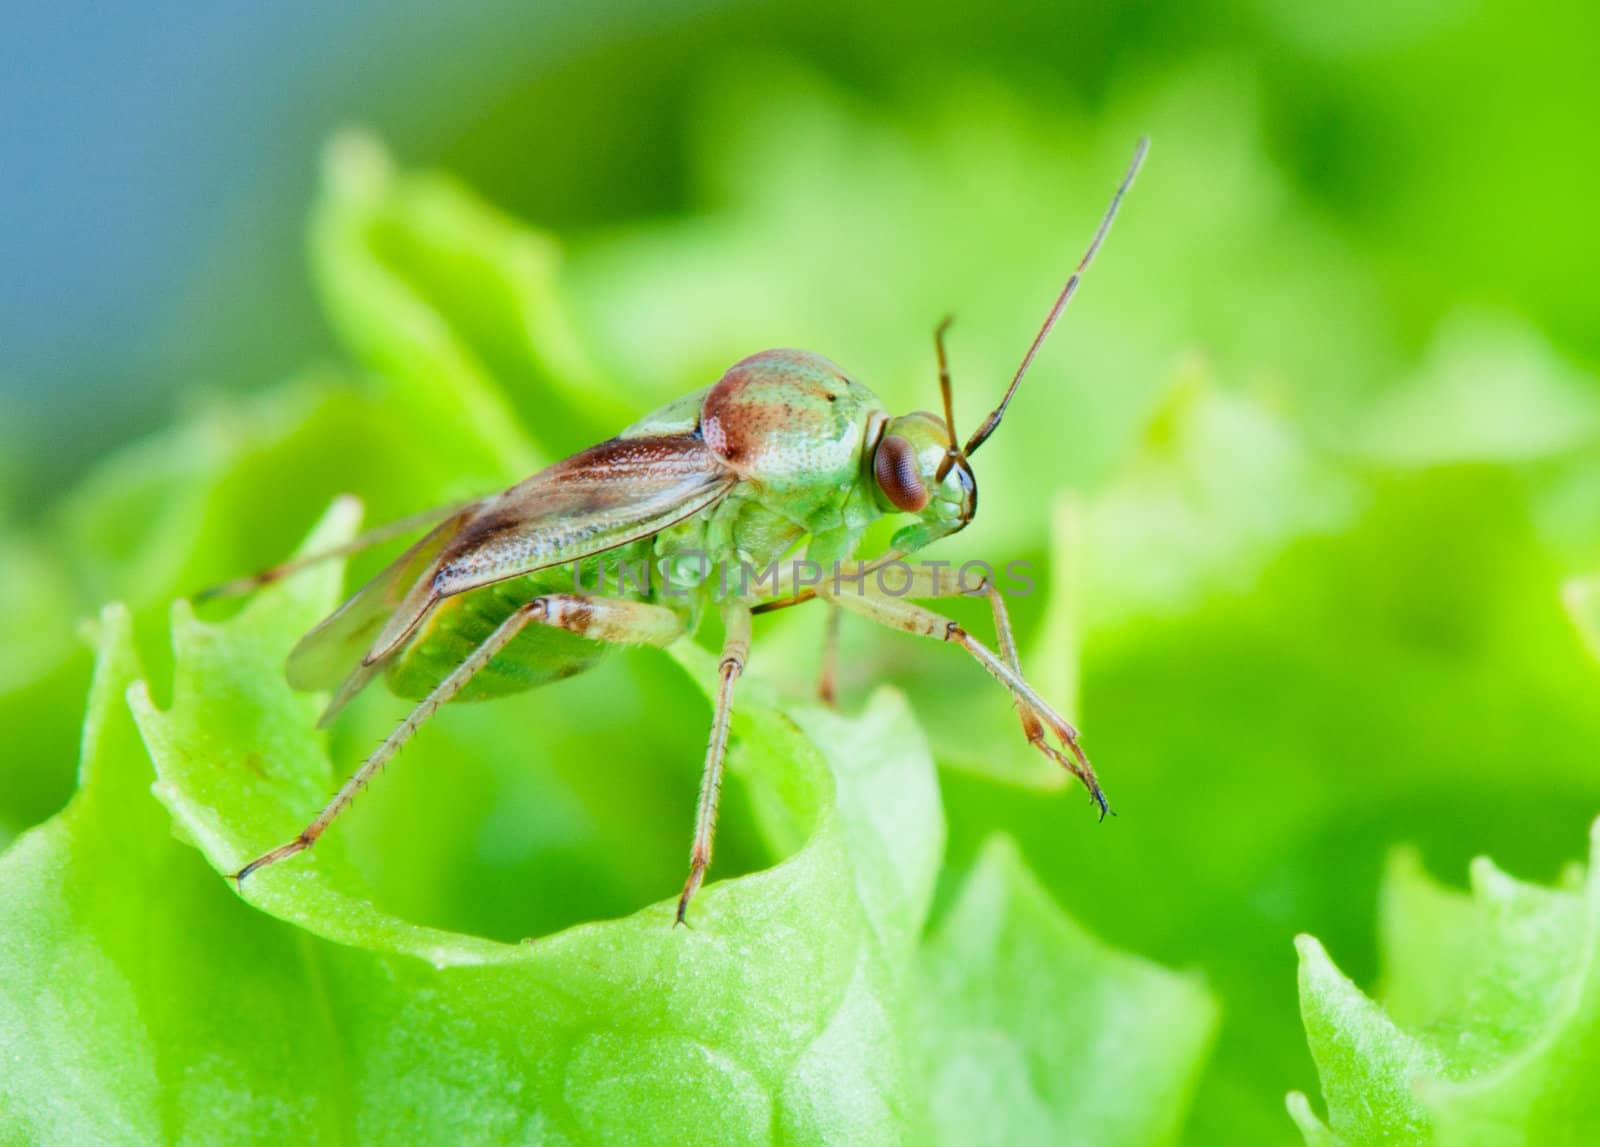 Mirid bug front view on a salad leaves  by Nanisimova